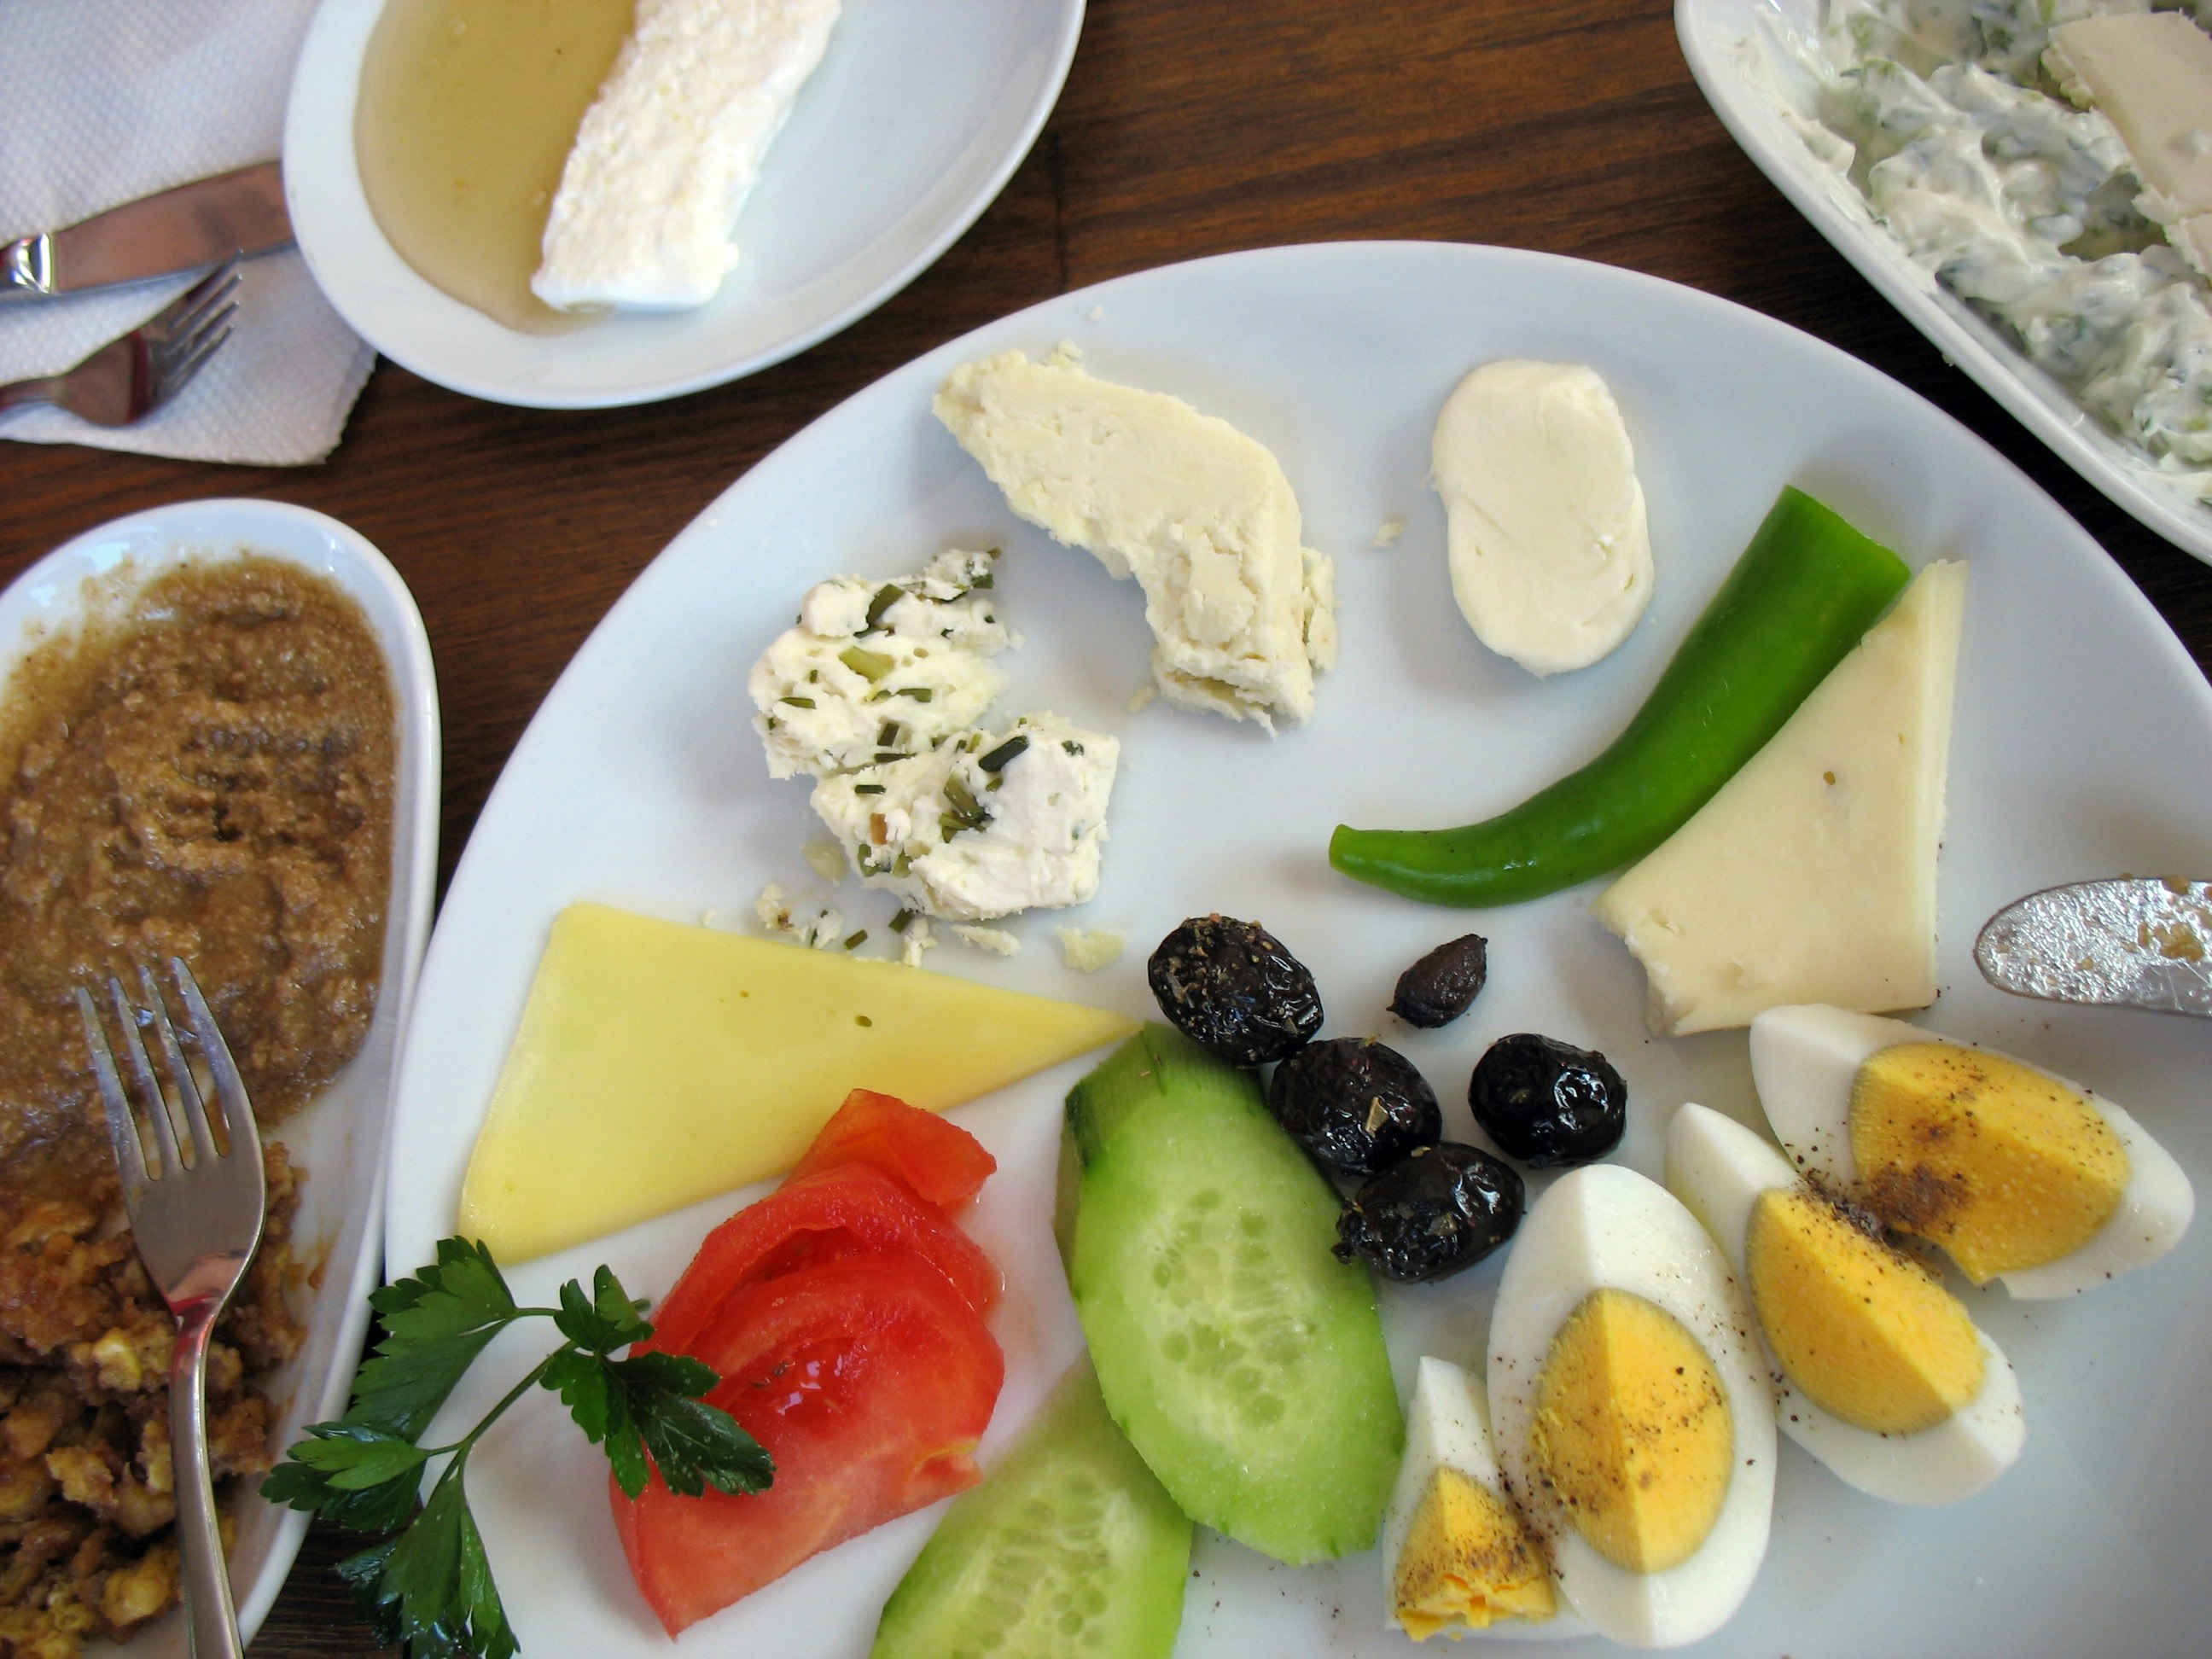 A plate of food is filled with a sliced boiled egg, slices of cucumbers, olives, cheese and tomatoes. There are plates filled with different types of sauces around the main plate. 